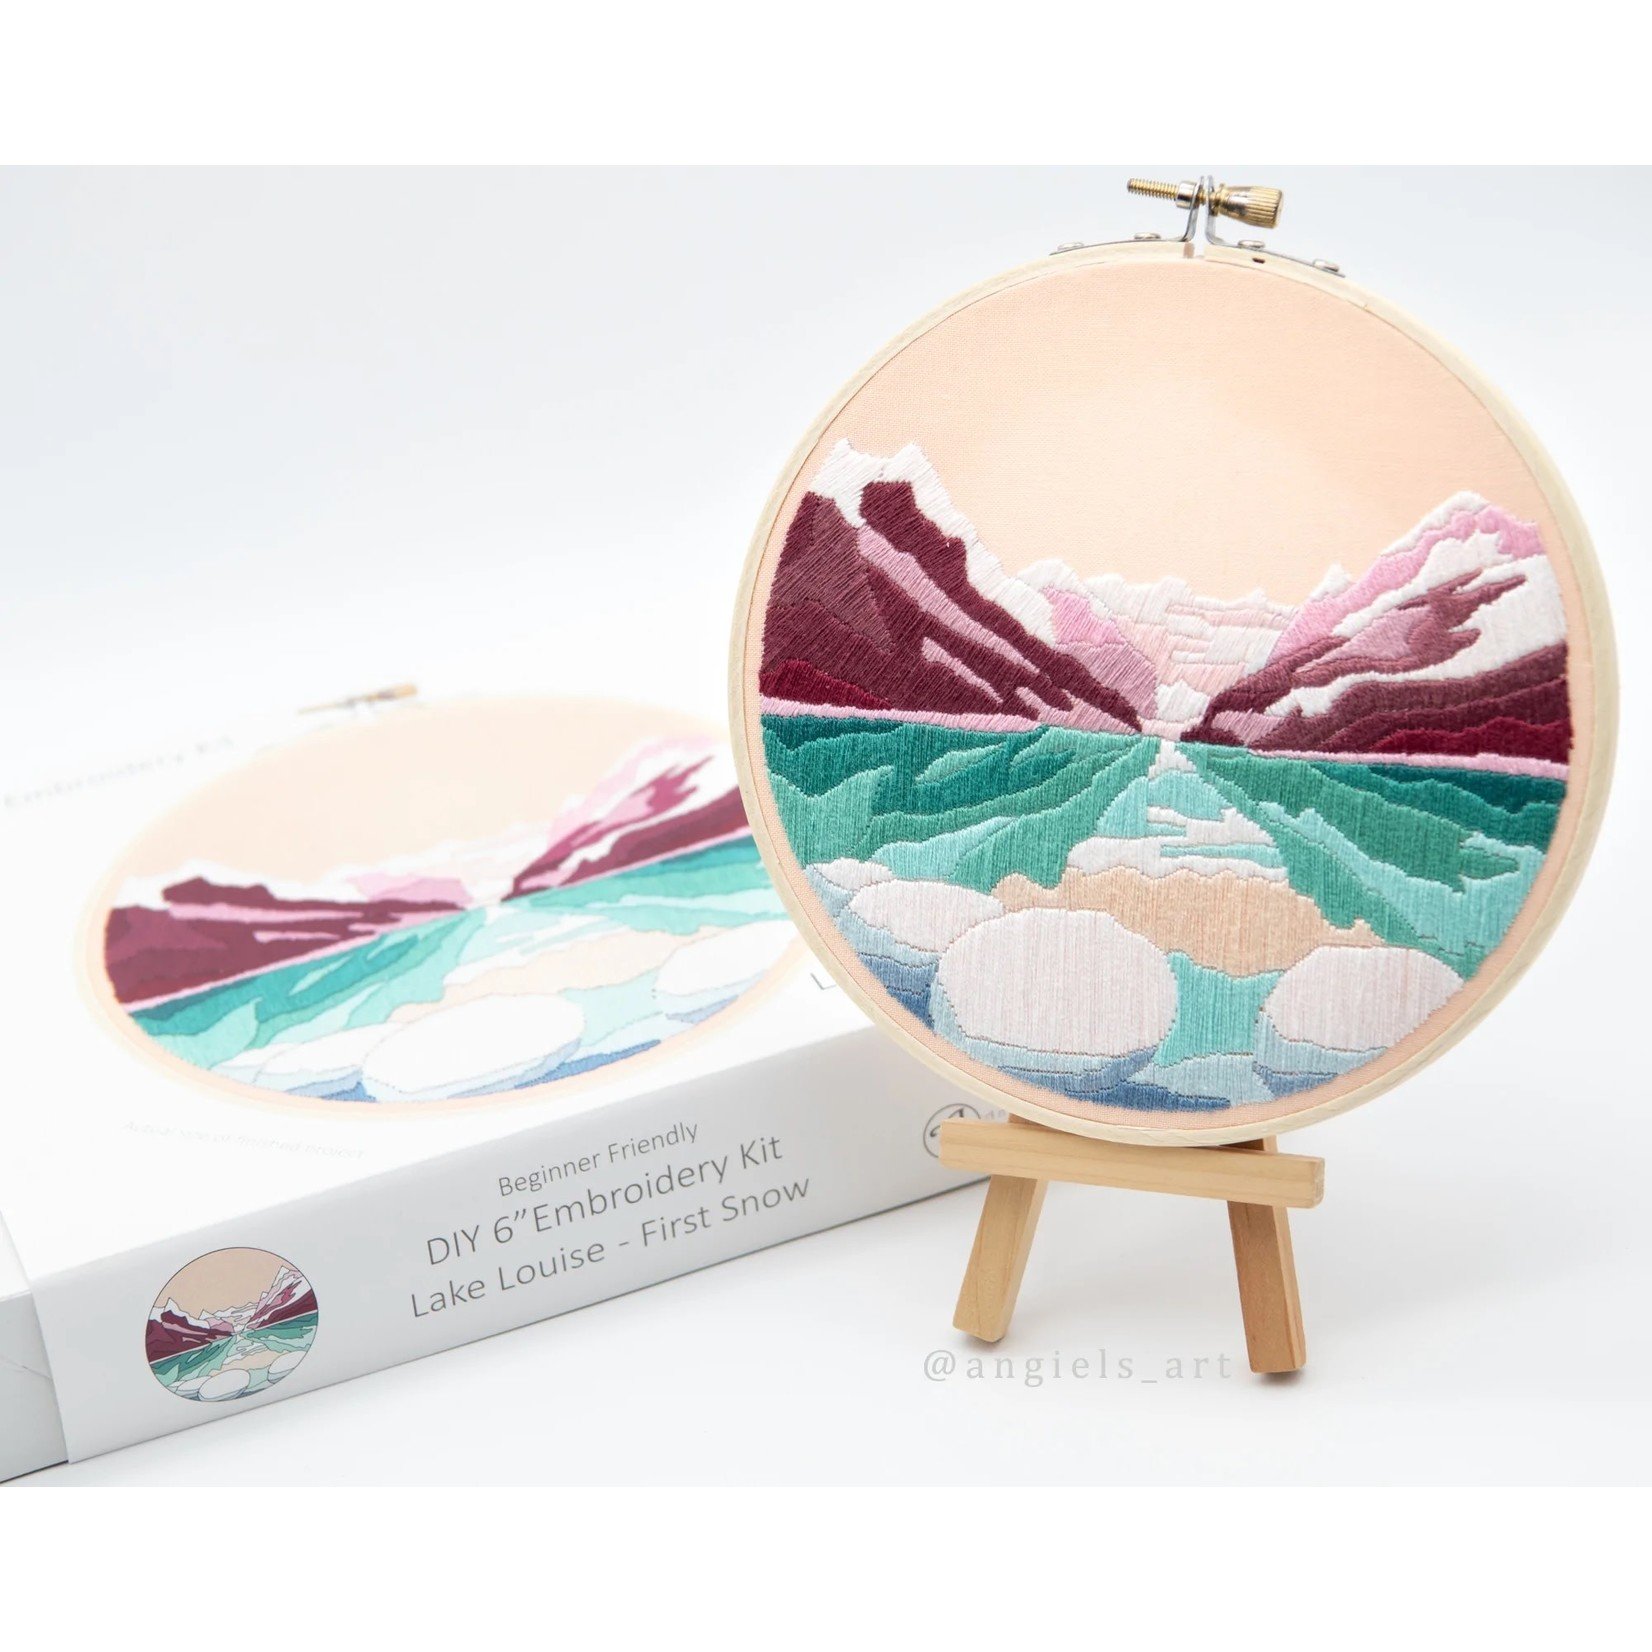 Anna Angiel Embroidery Kit - Lake Louise - First Snow